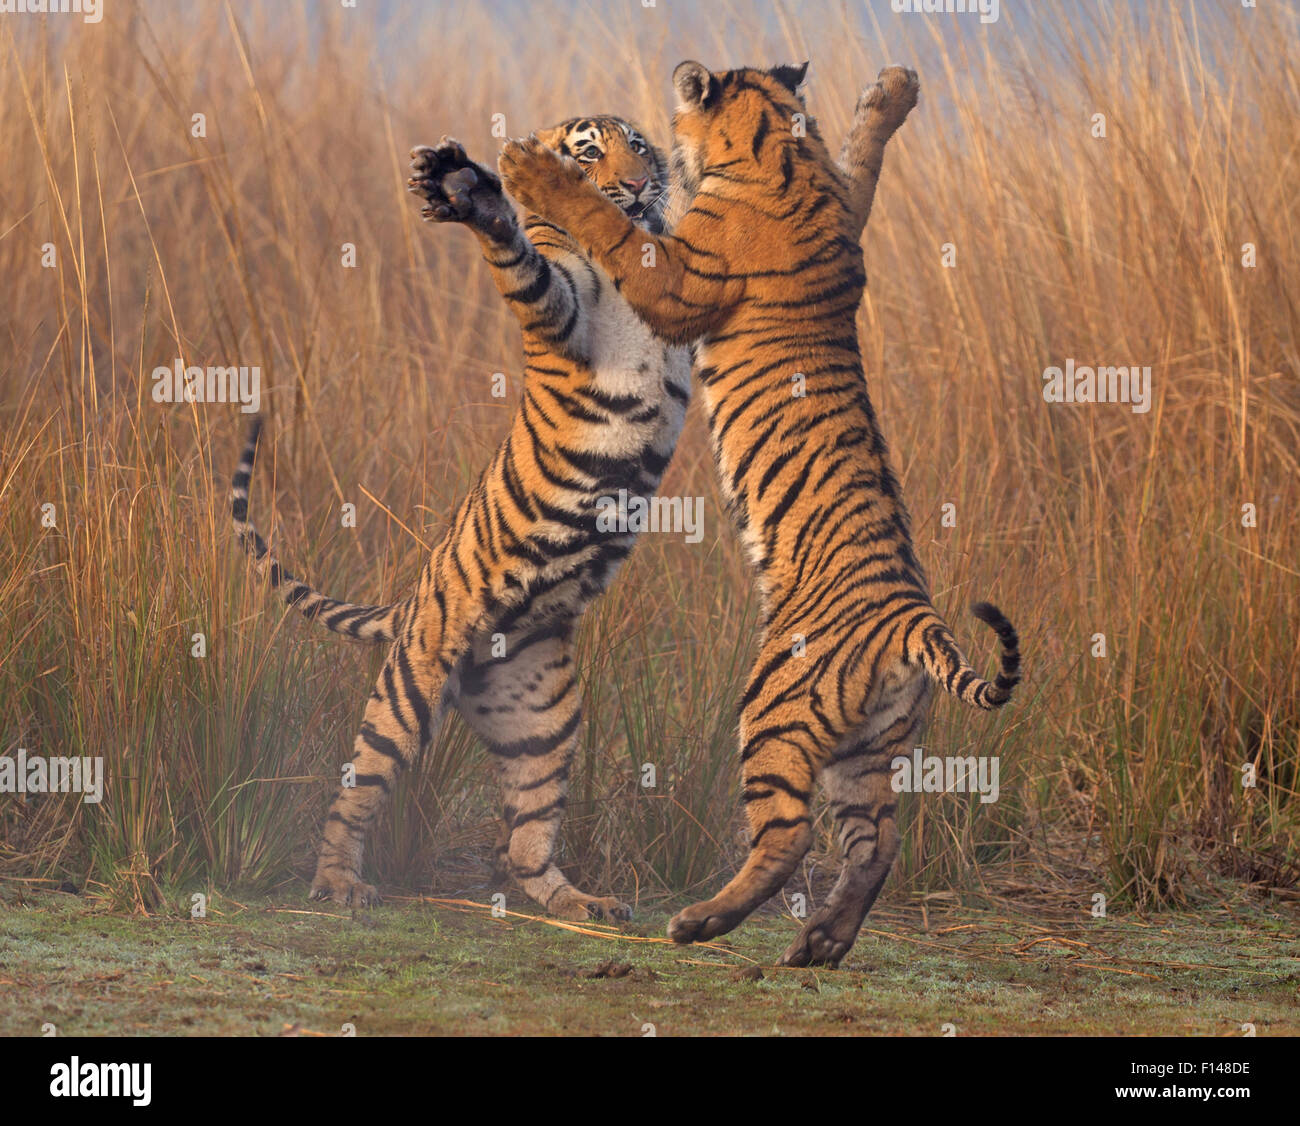 Premium Photo  Tiger standing on its hind legs reaching up to